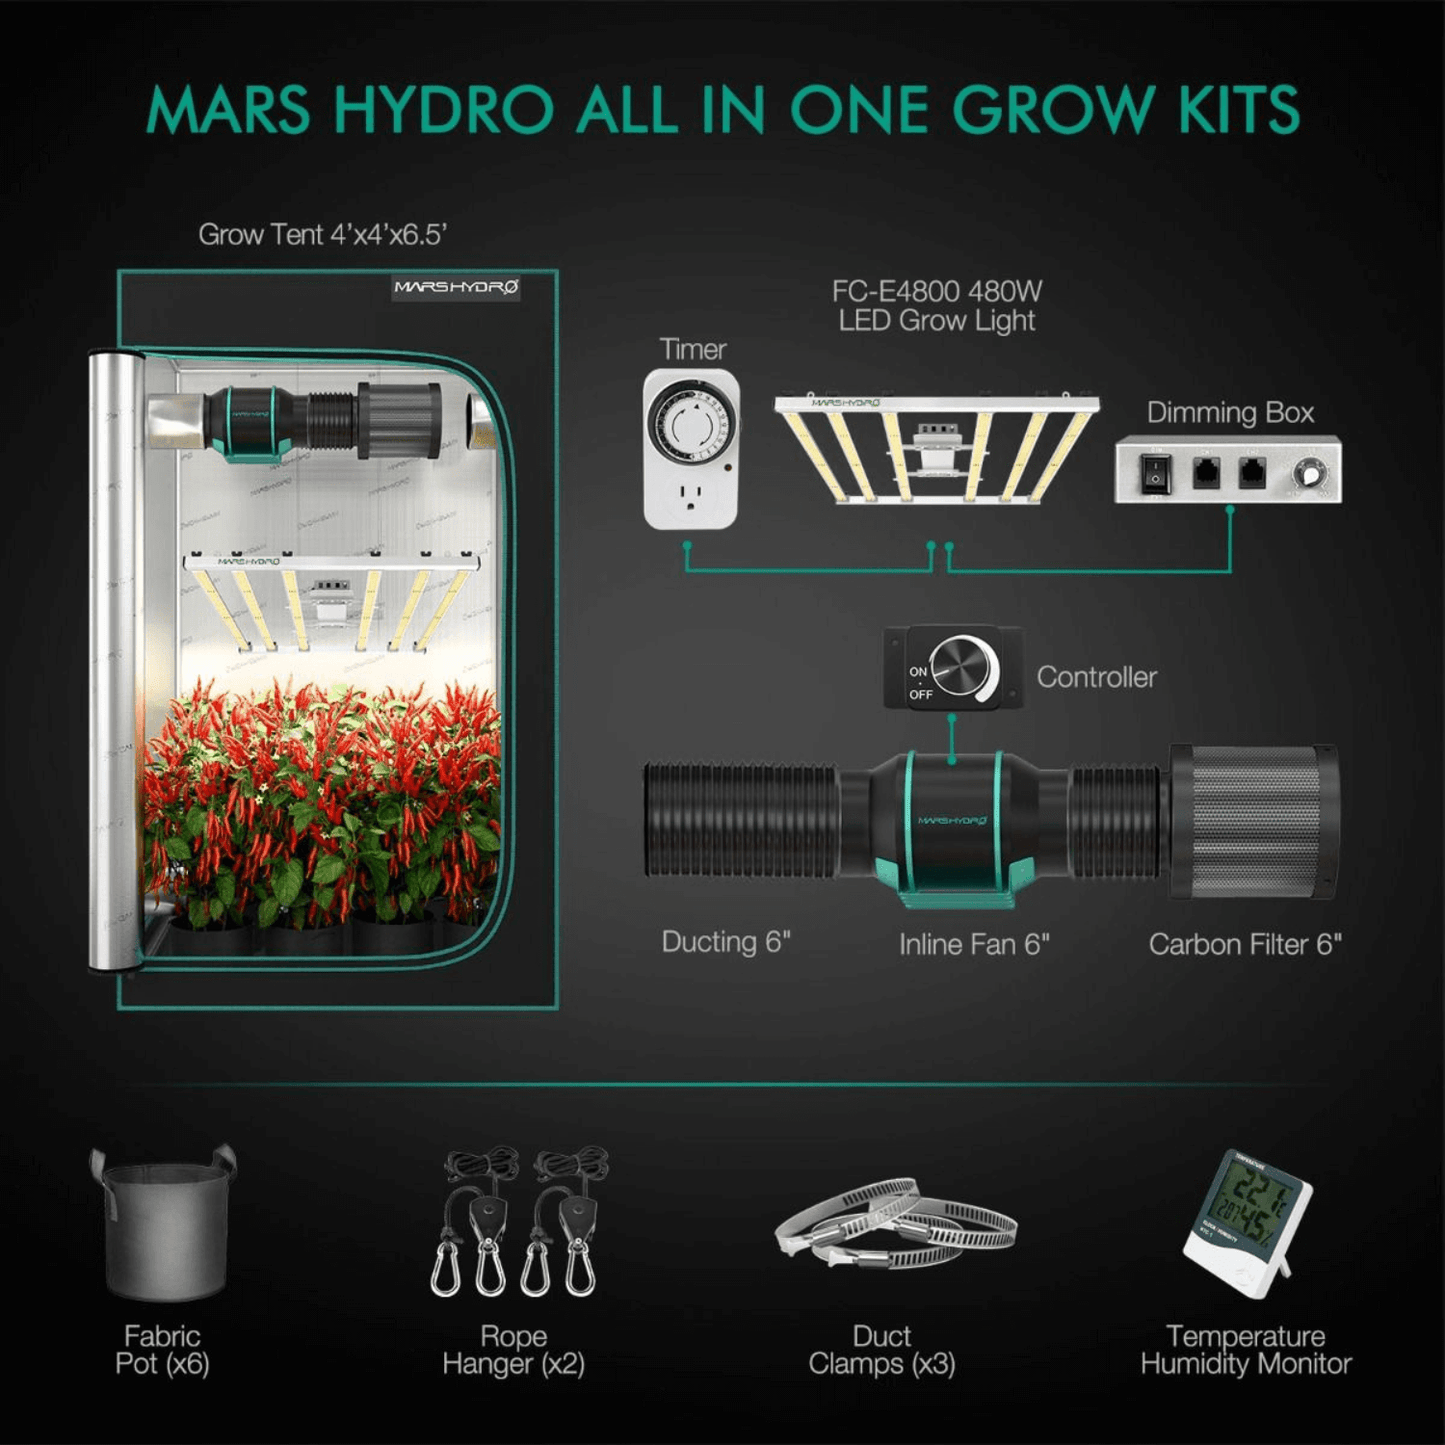 Mars Hydro FC-E4800 LED Grow Light + 4' x 4' Grow Tent + Inline Fan Combo with Speed Controller MH-FC-E4800-SET Kits